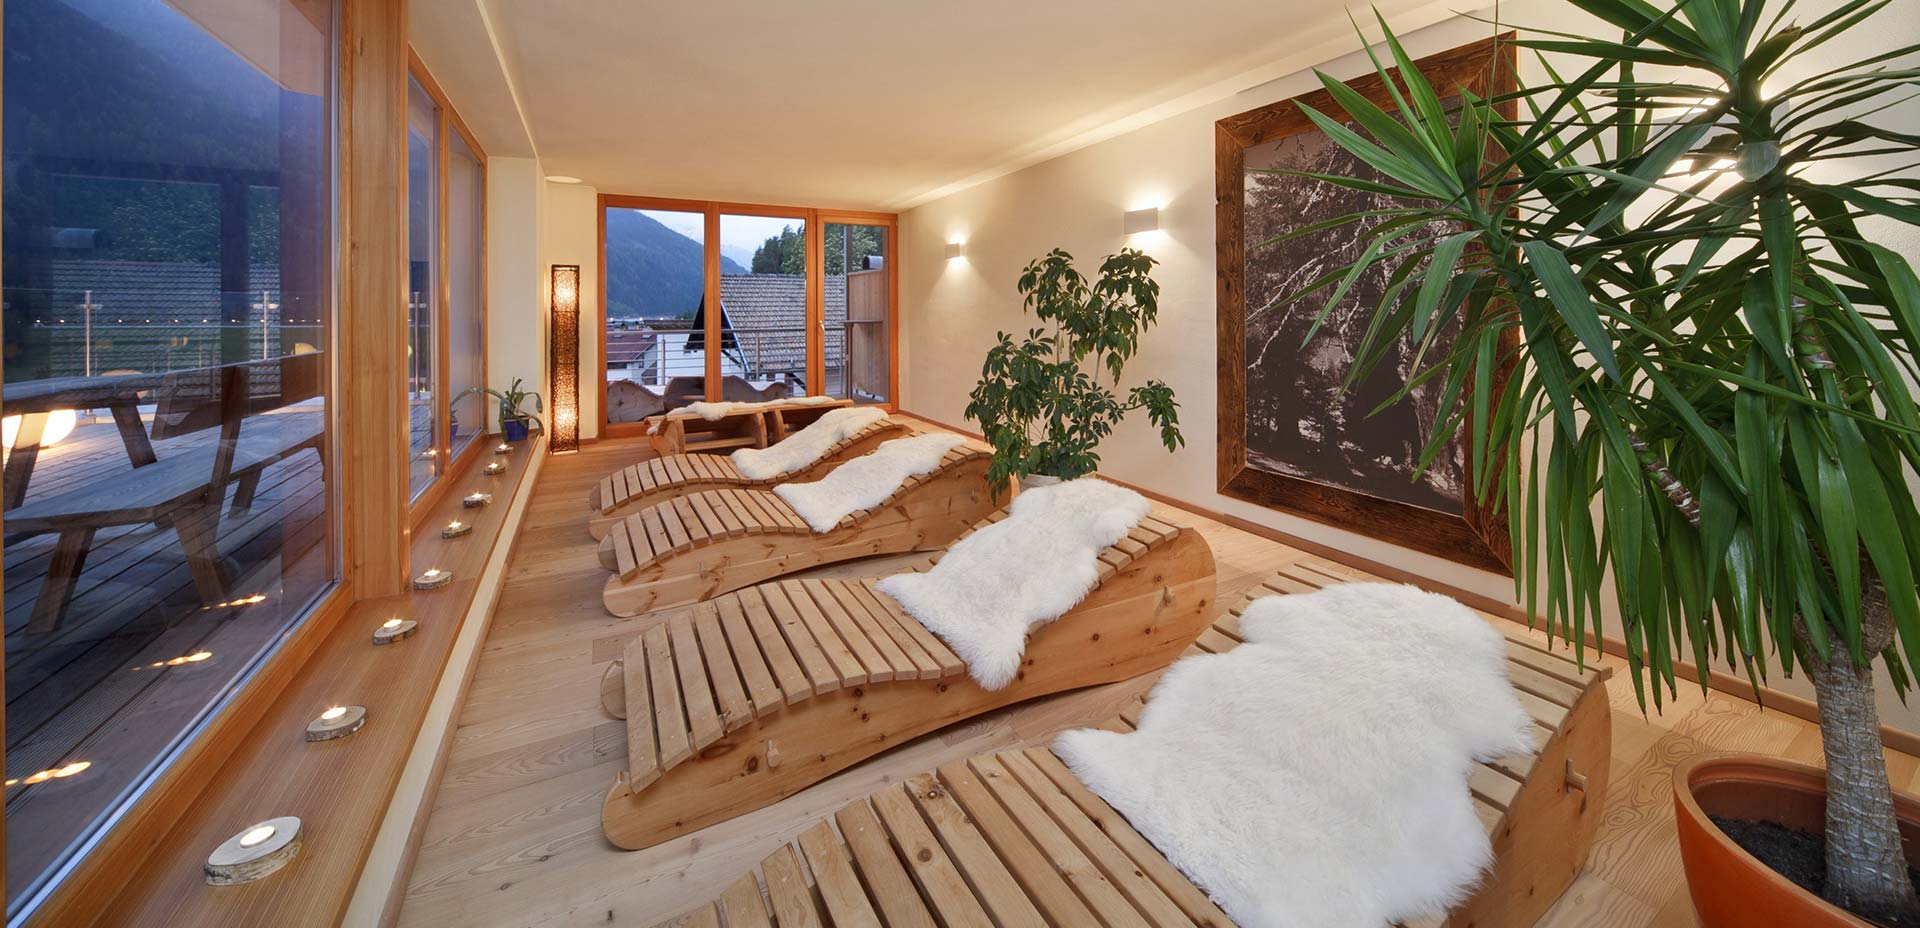 Relaxation room with panoramic views